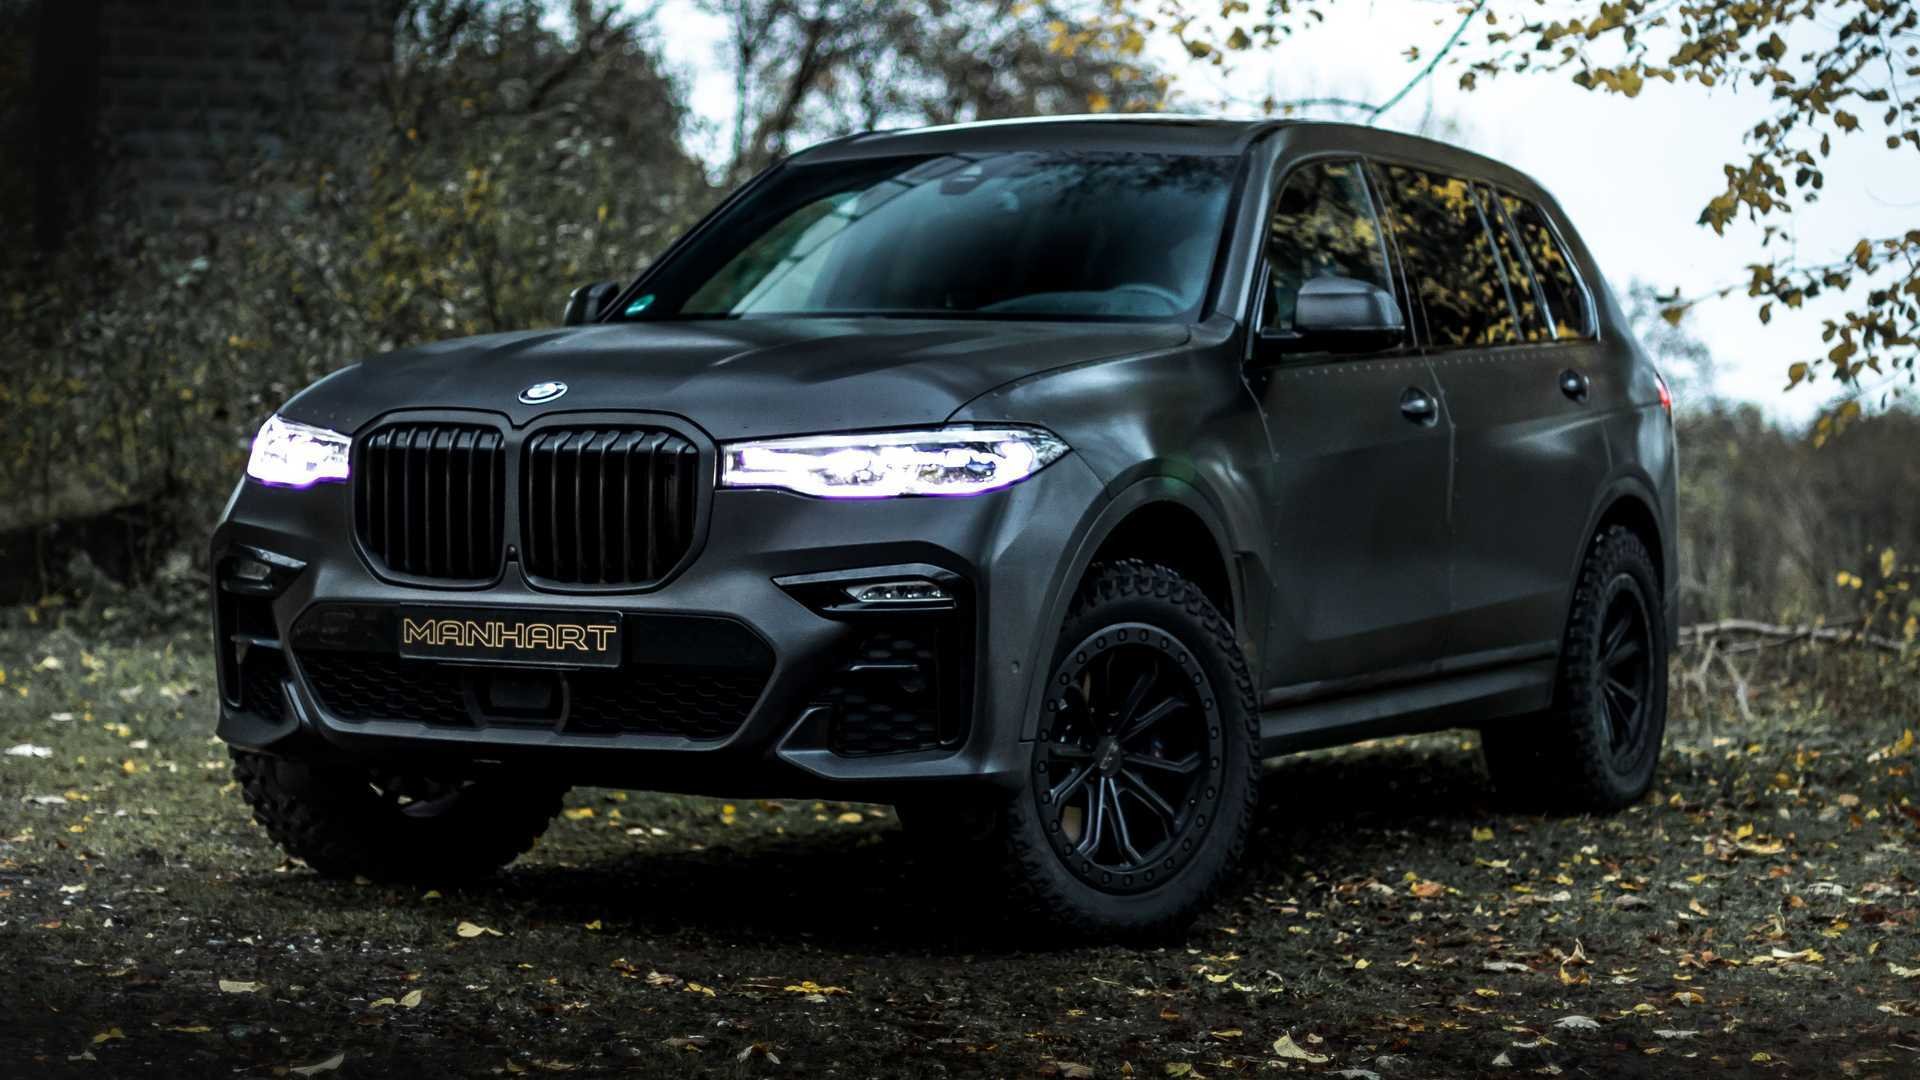 BMW X7 Dirt Edition By Manhart Joins The Army With Armored Look